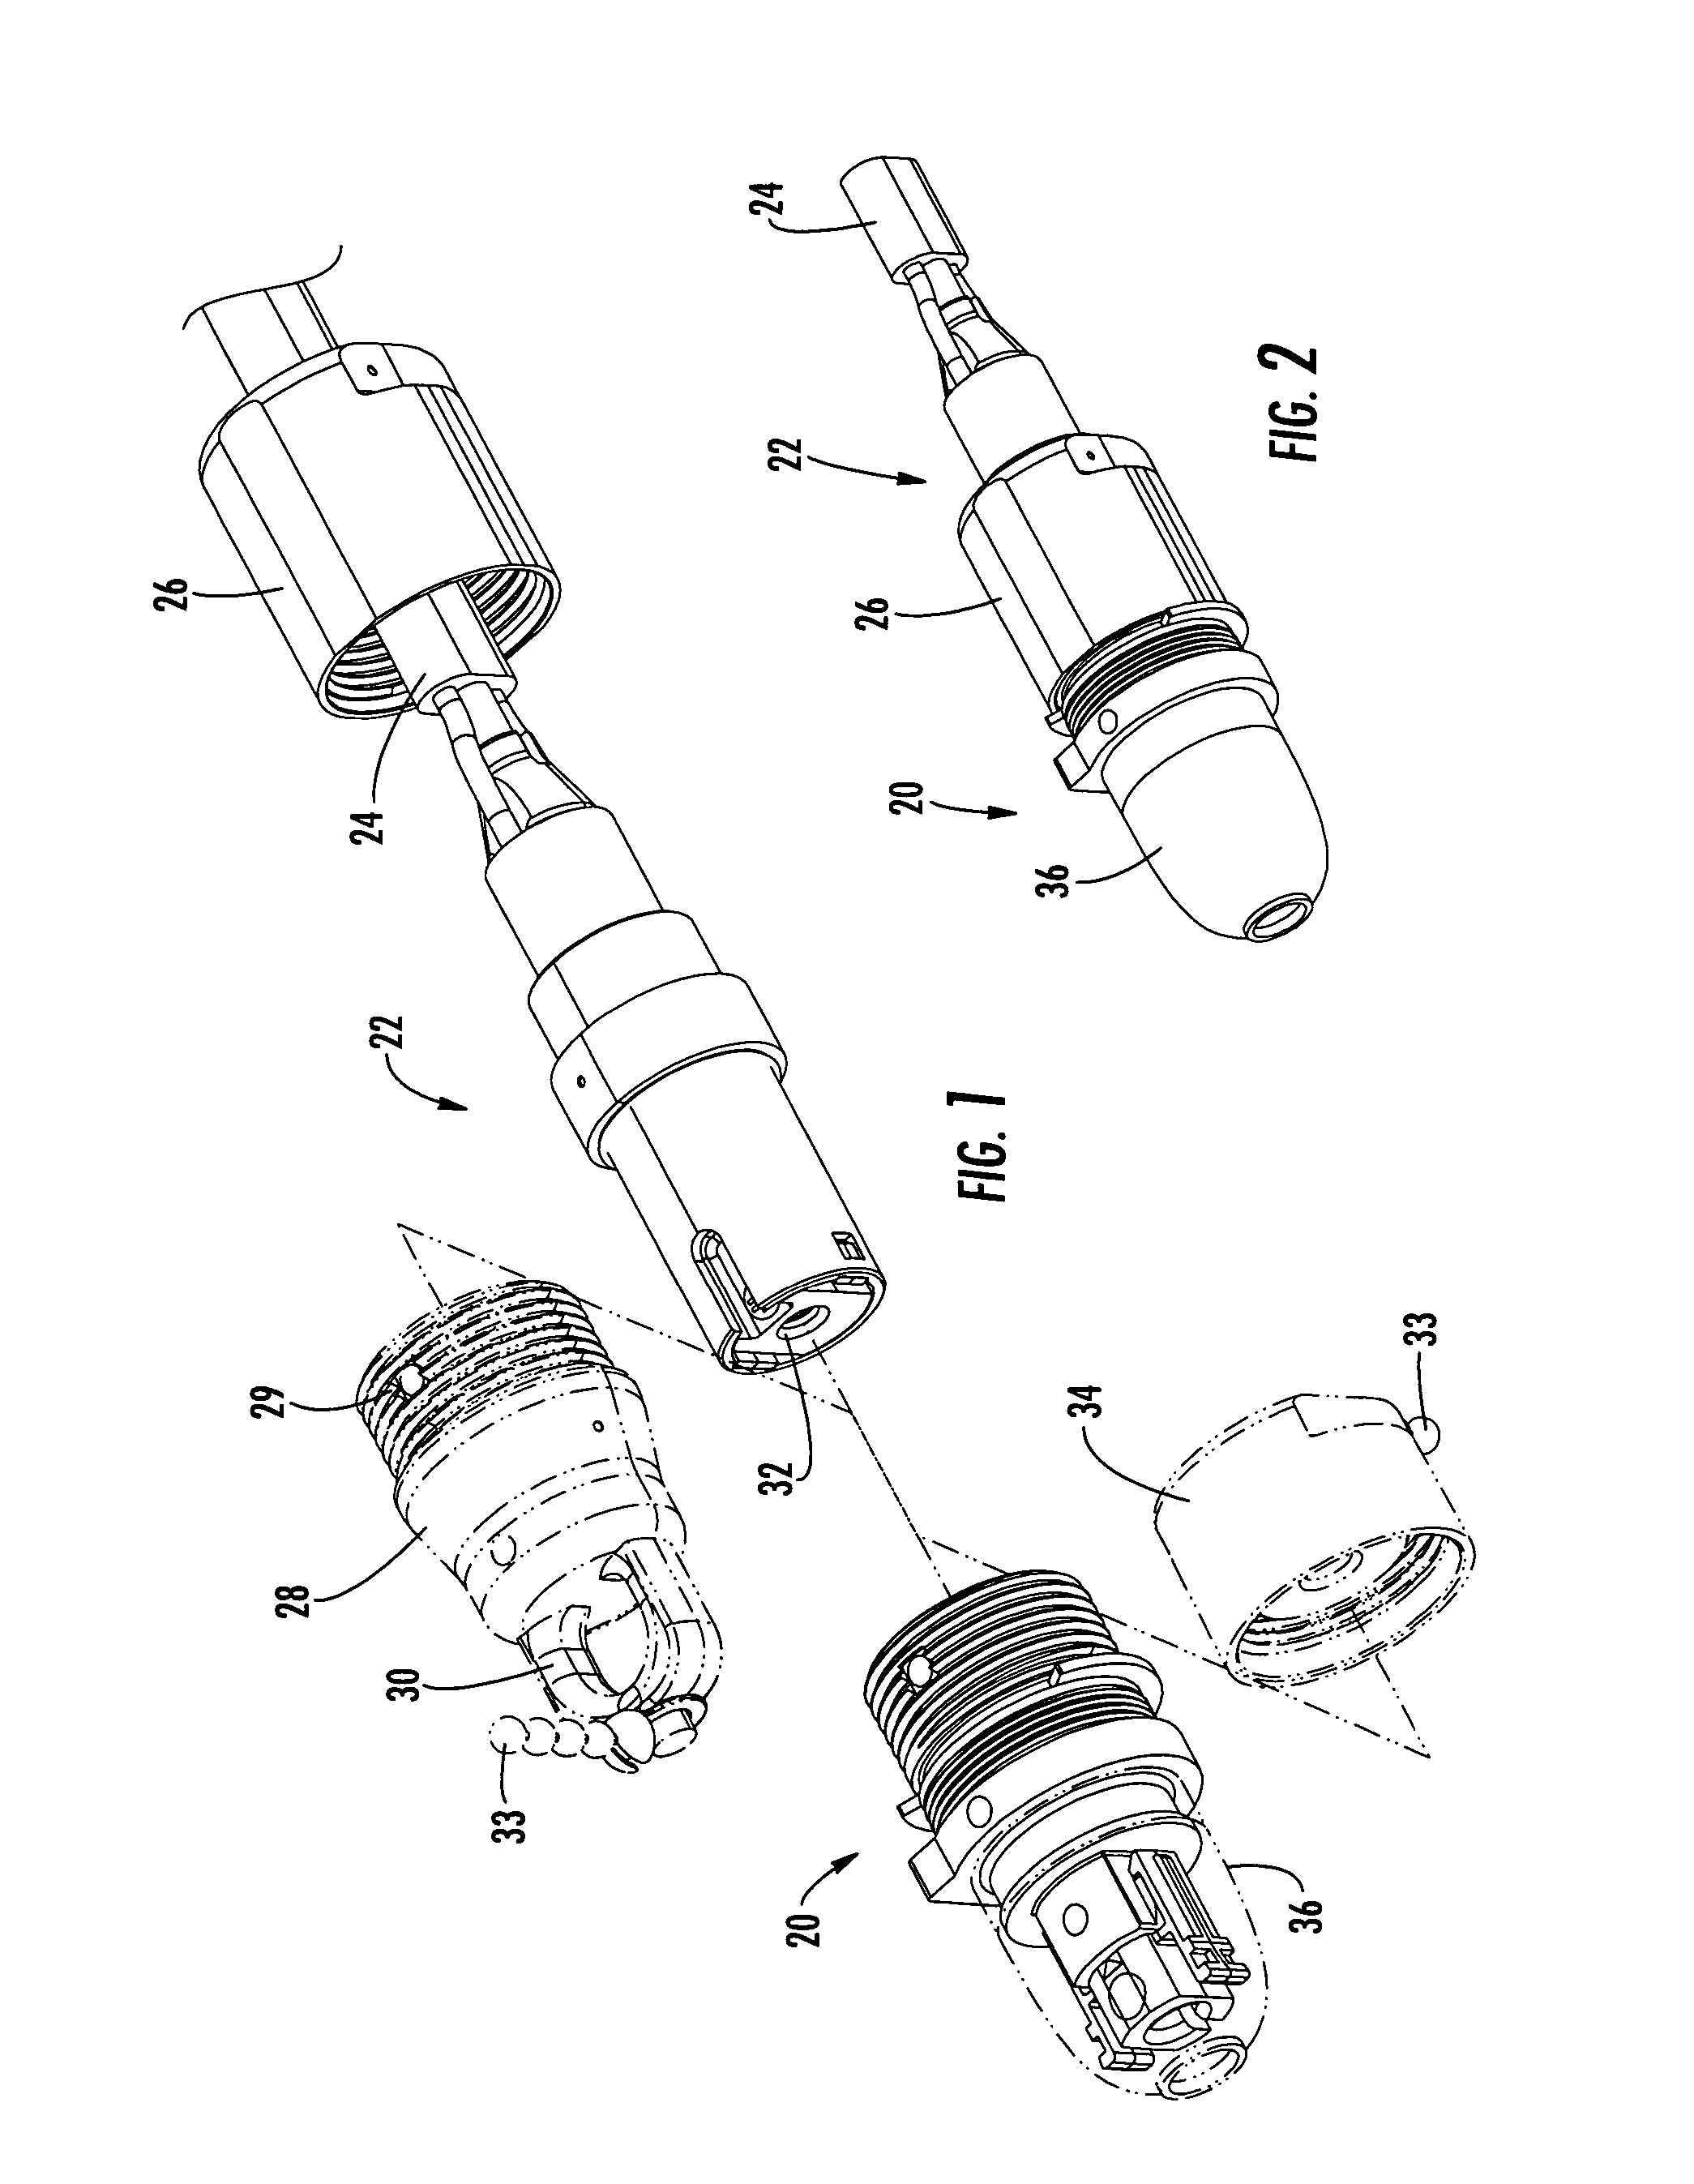 Fiber optic receptacle and plug assemblies with alignment and keying features